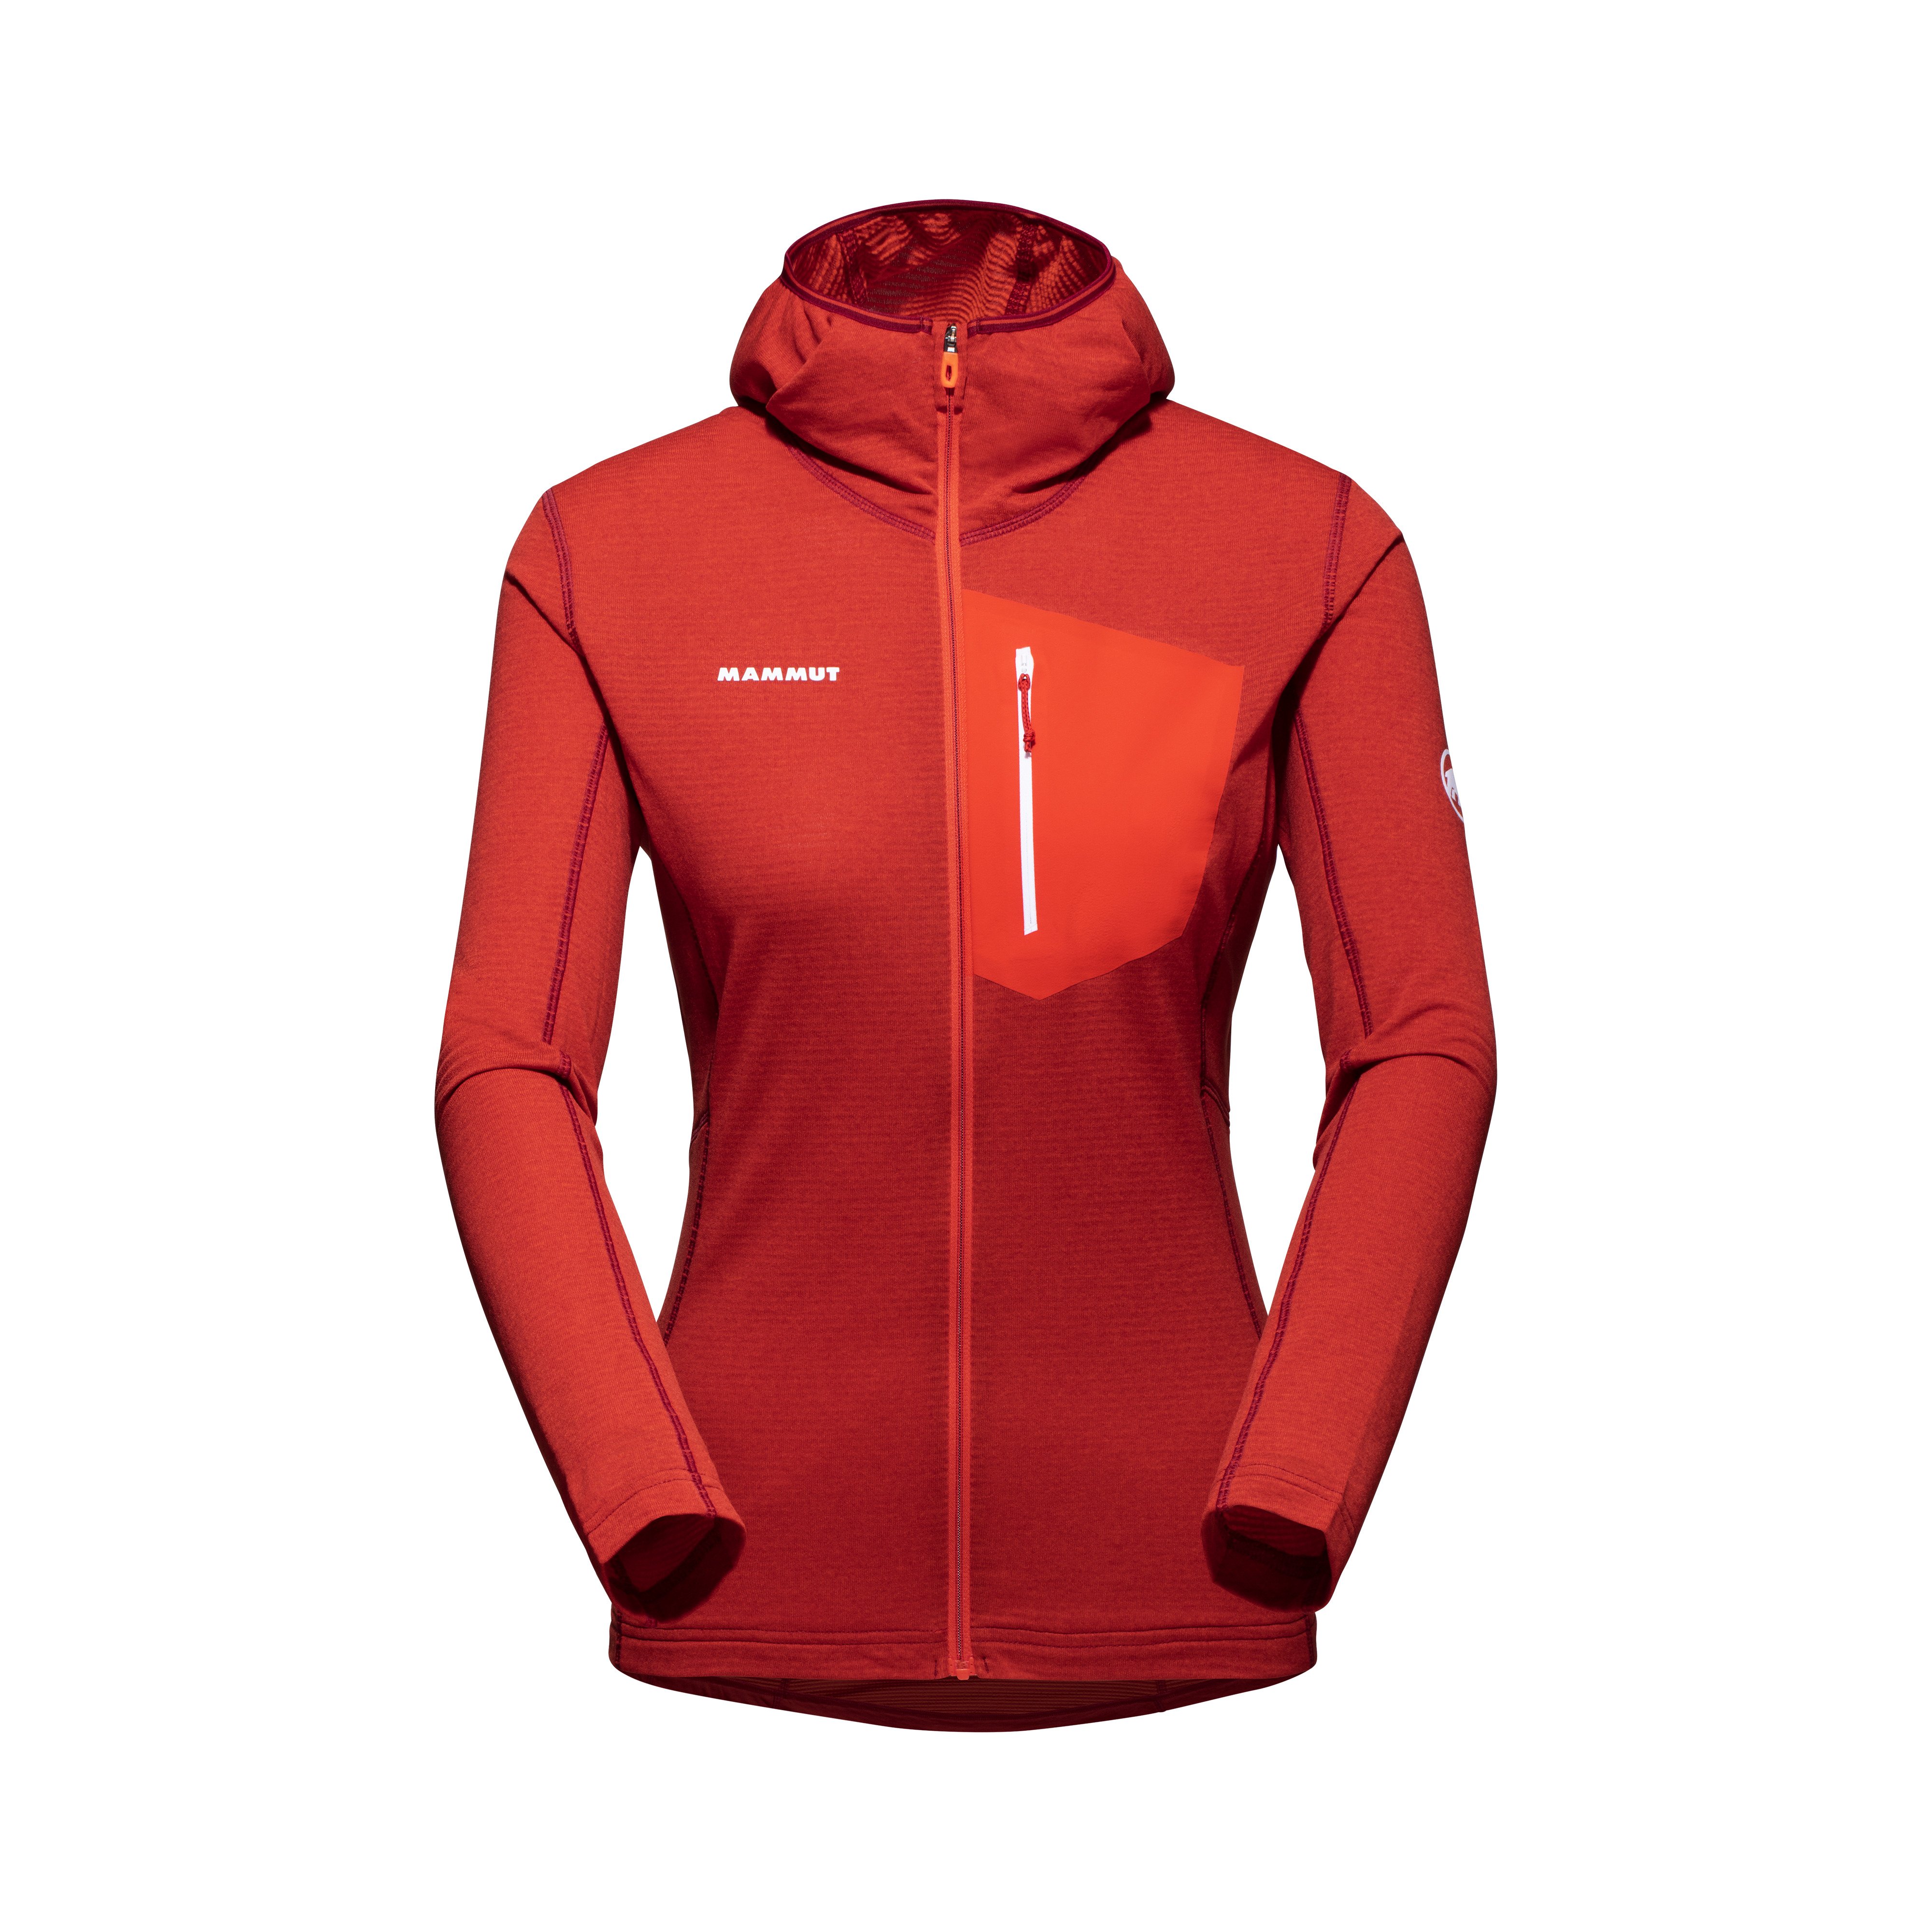 Aenergy Light ML Hooded Jacket Women - hot red-blood red, XS thumbnail